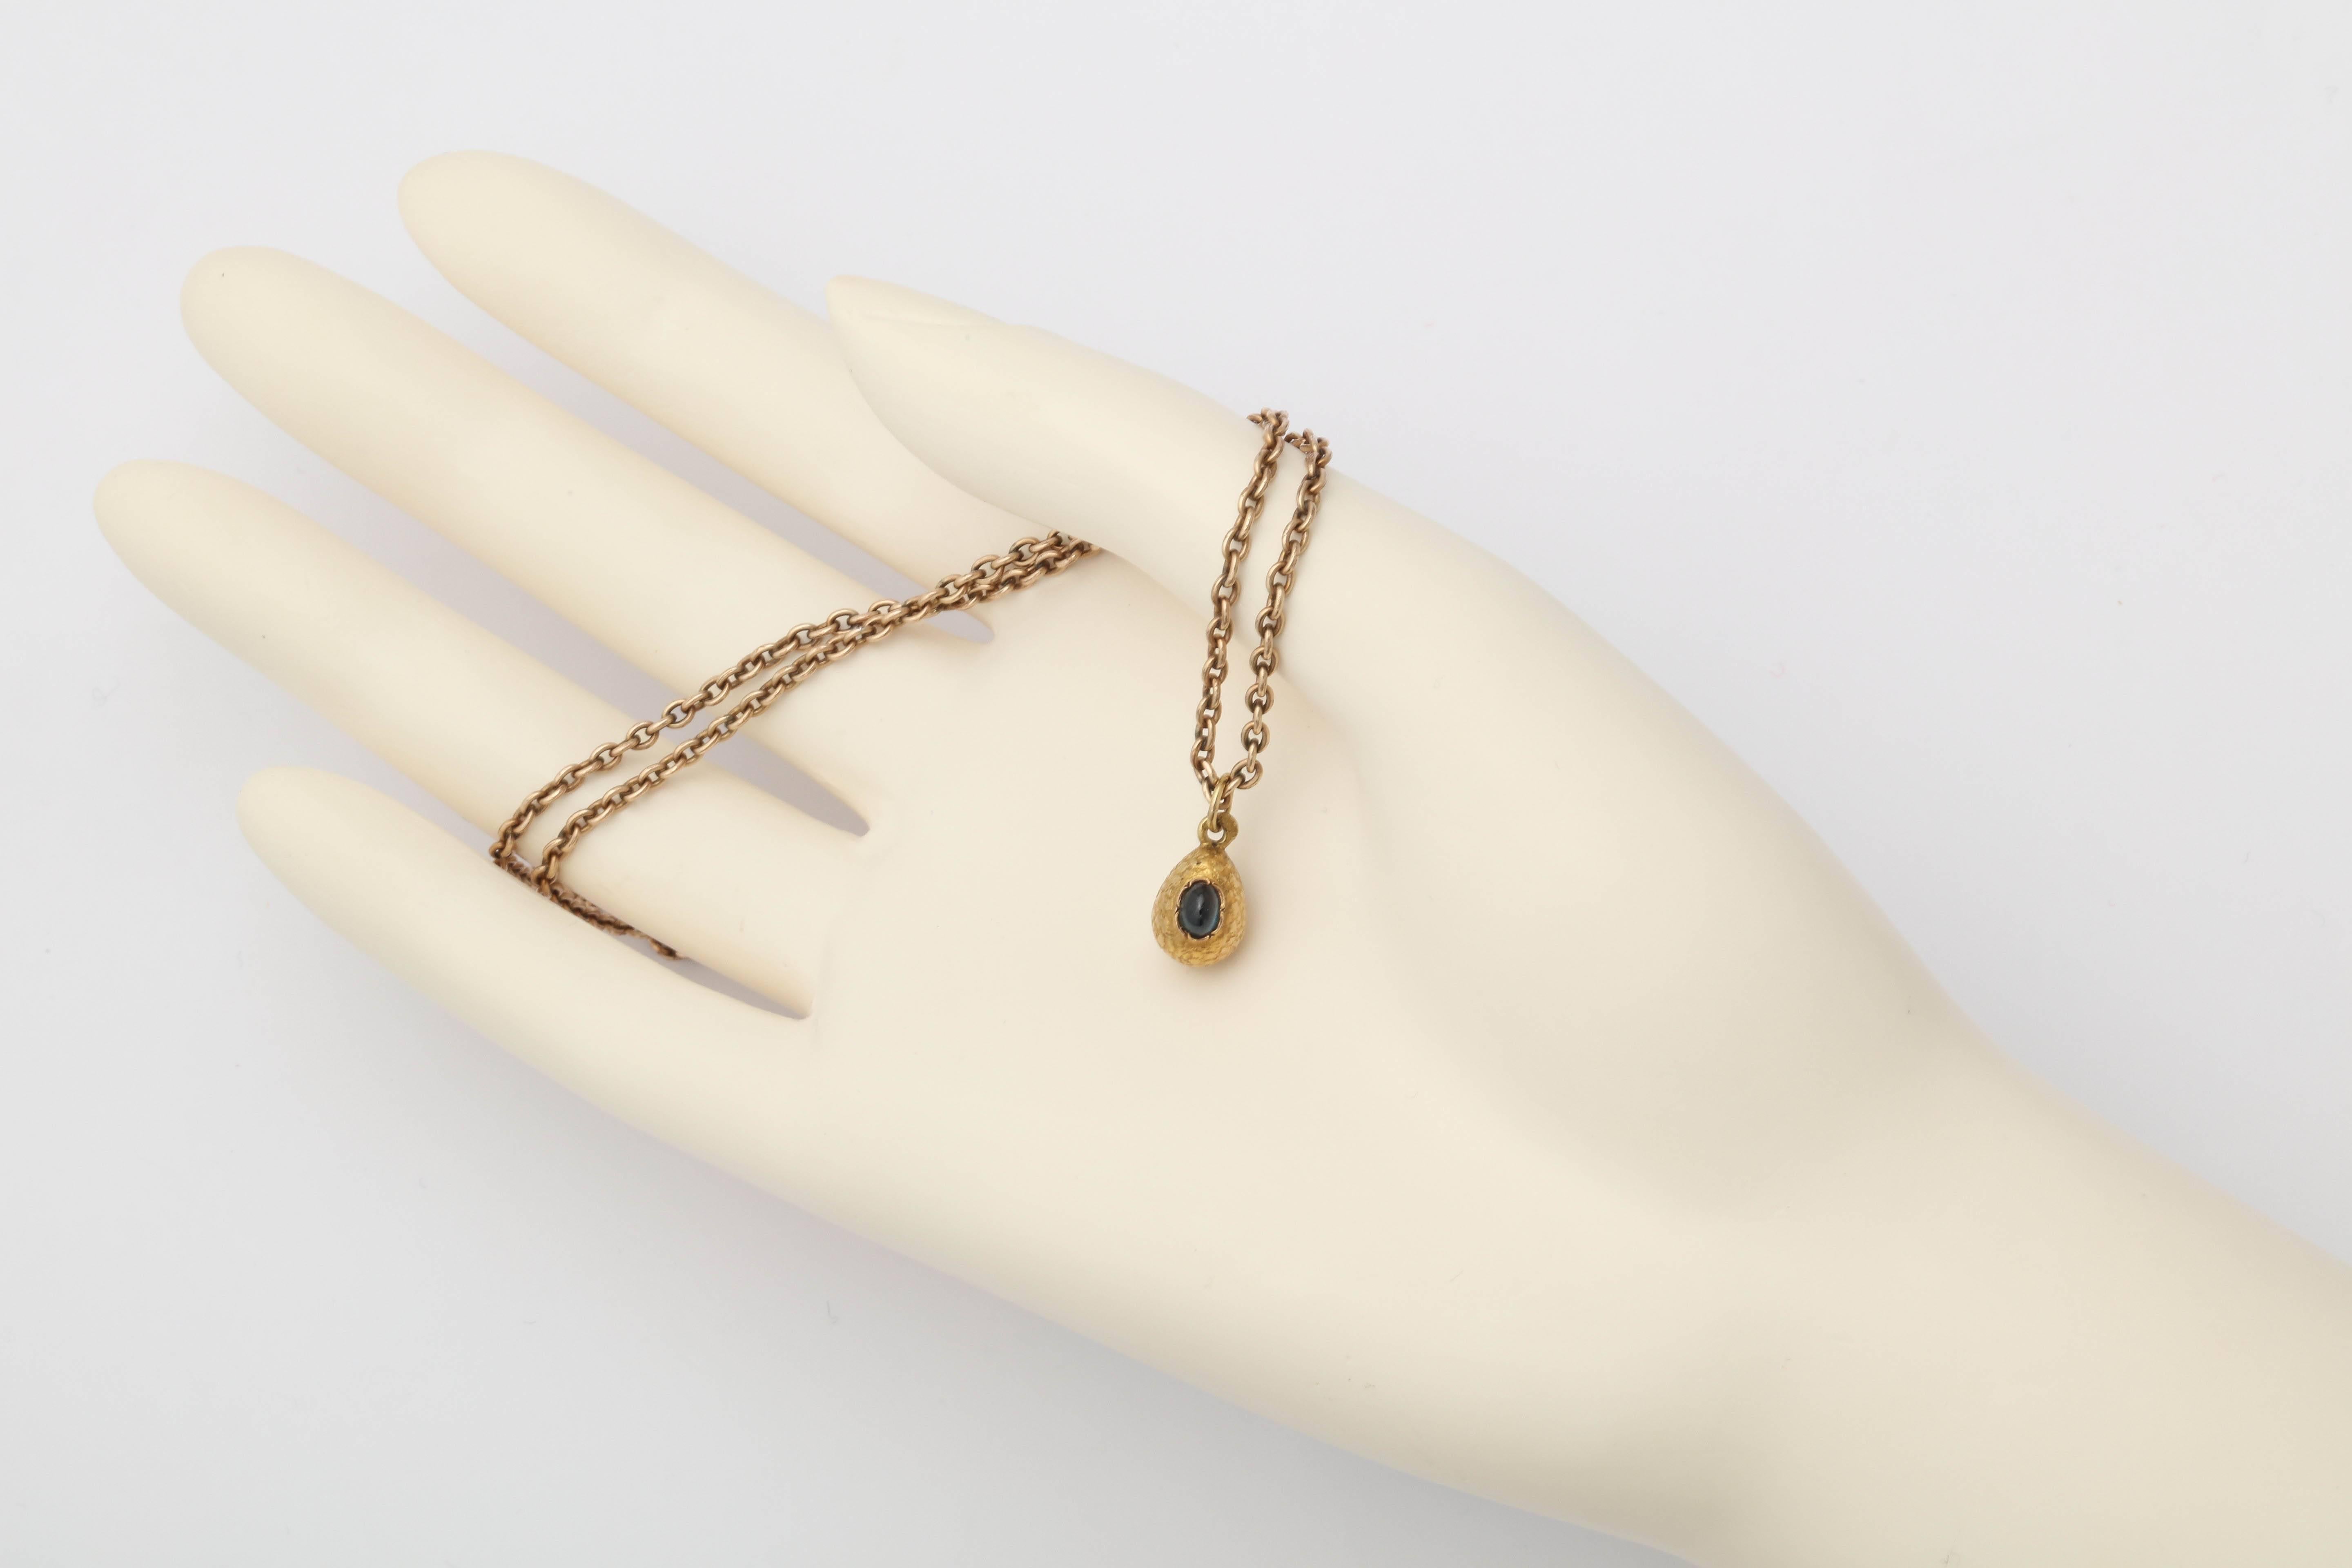 From the Romanov era, of textured gold set with a cabochon sapphire attached to a gold suspension ring.

Chain not included. 